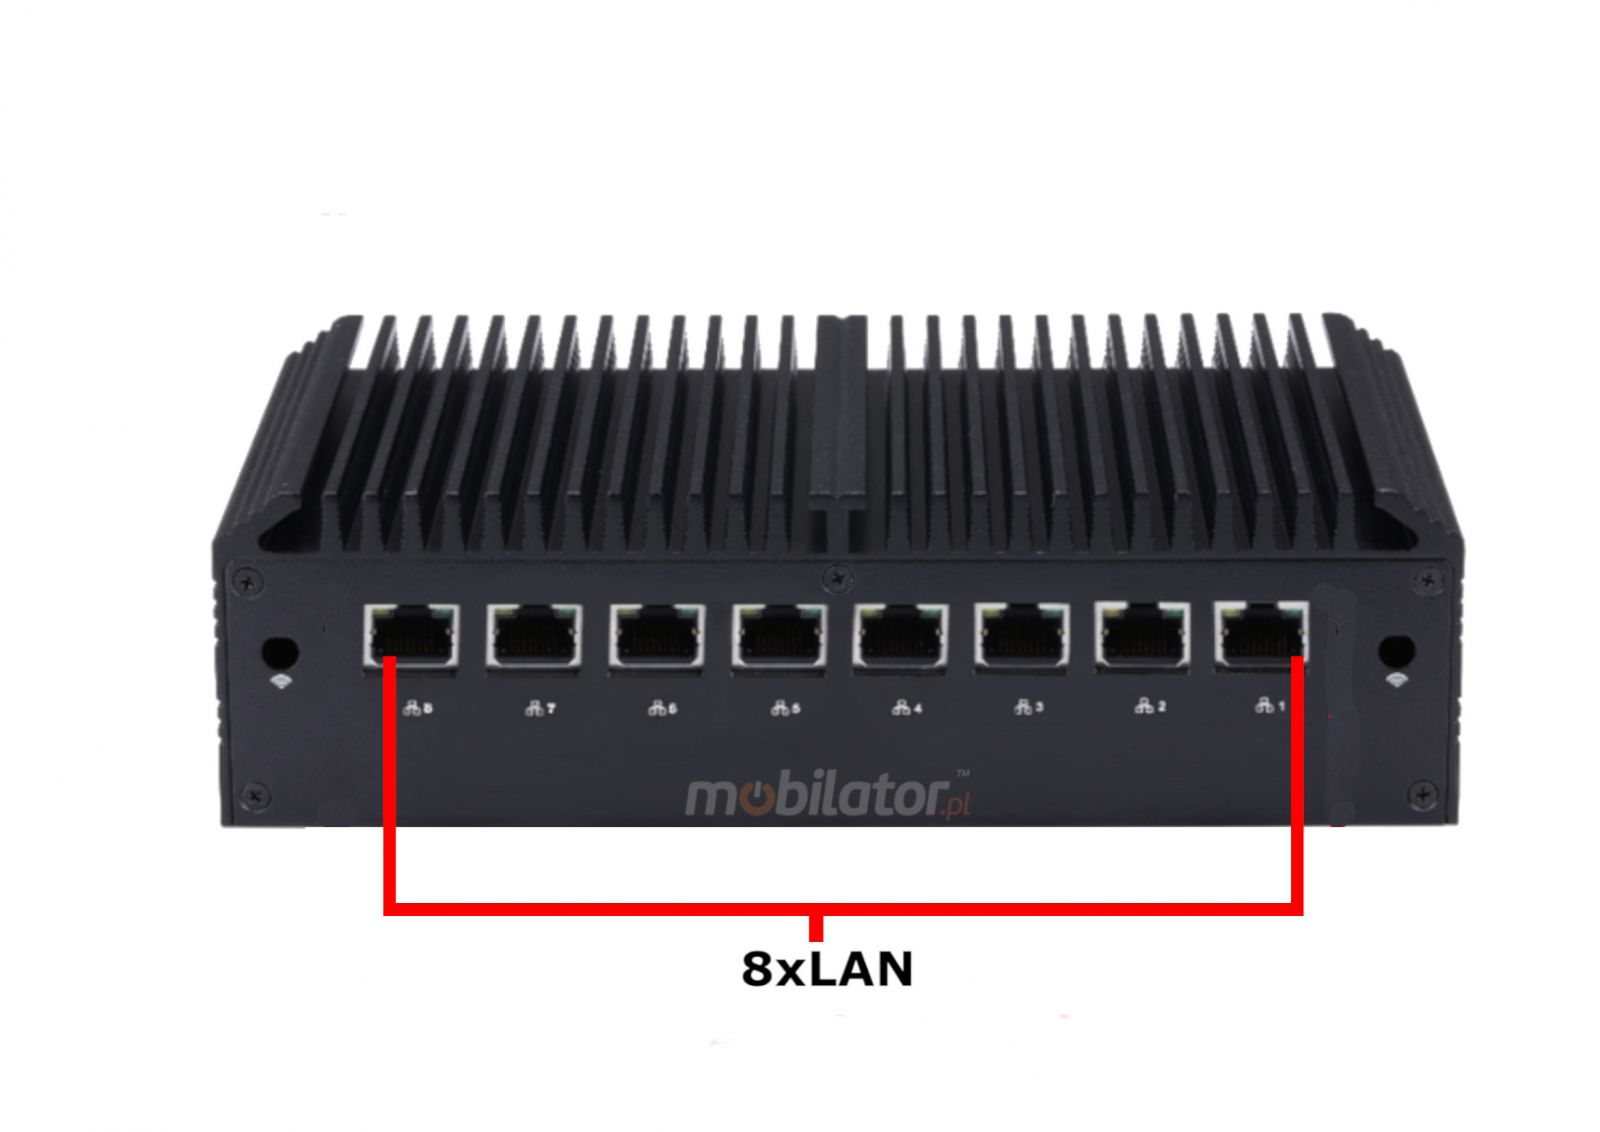 8 LAN connections in Q1012GE Version 2 and WiFi